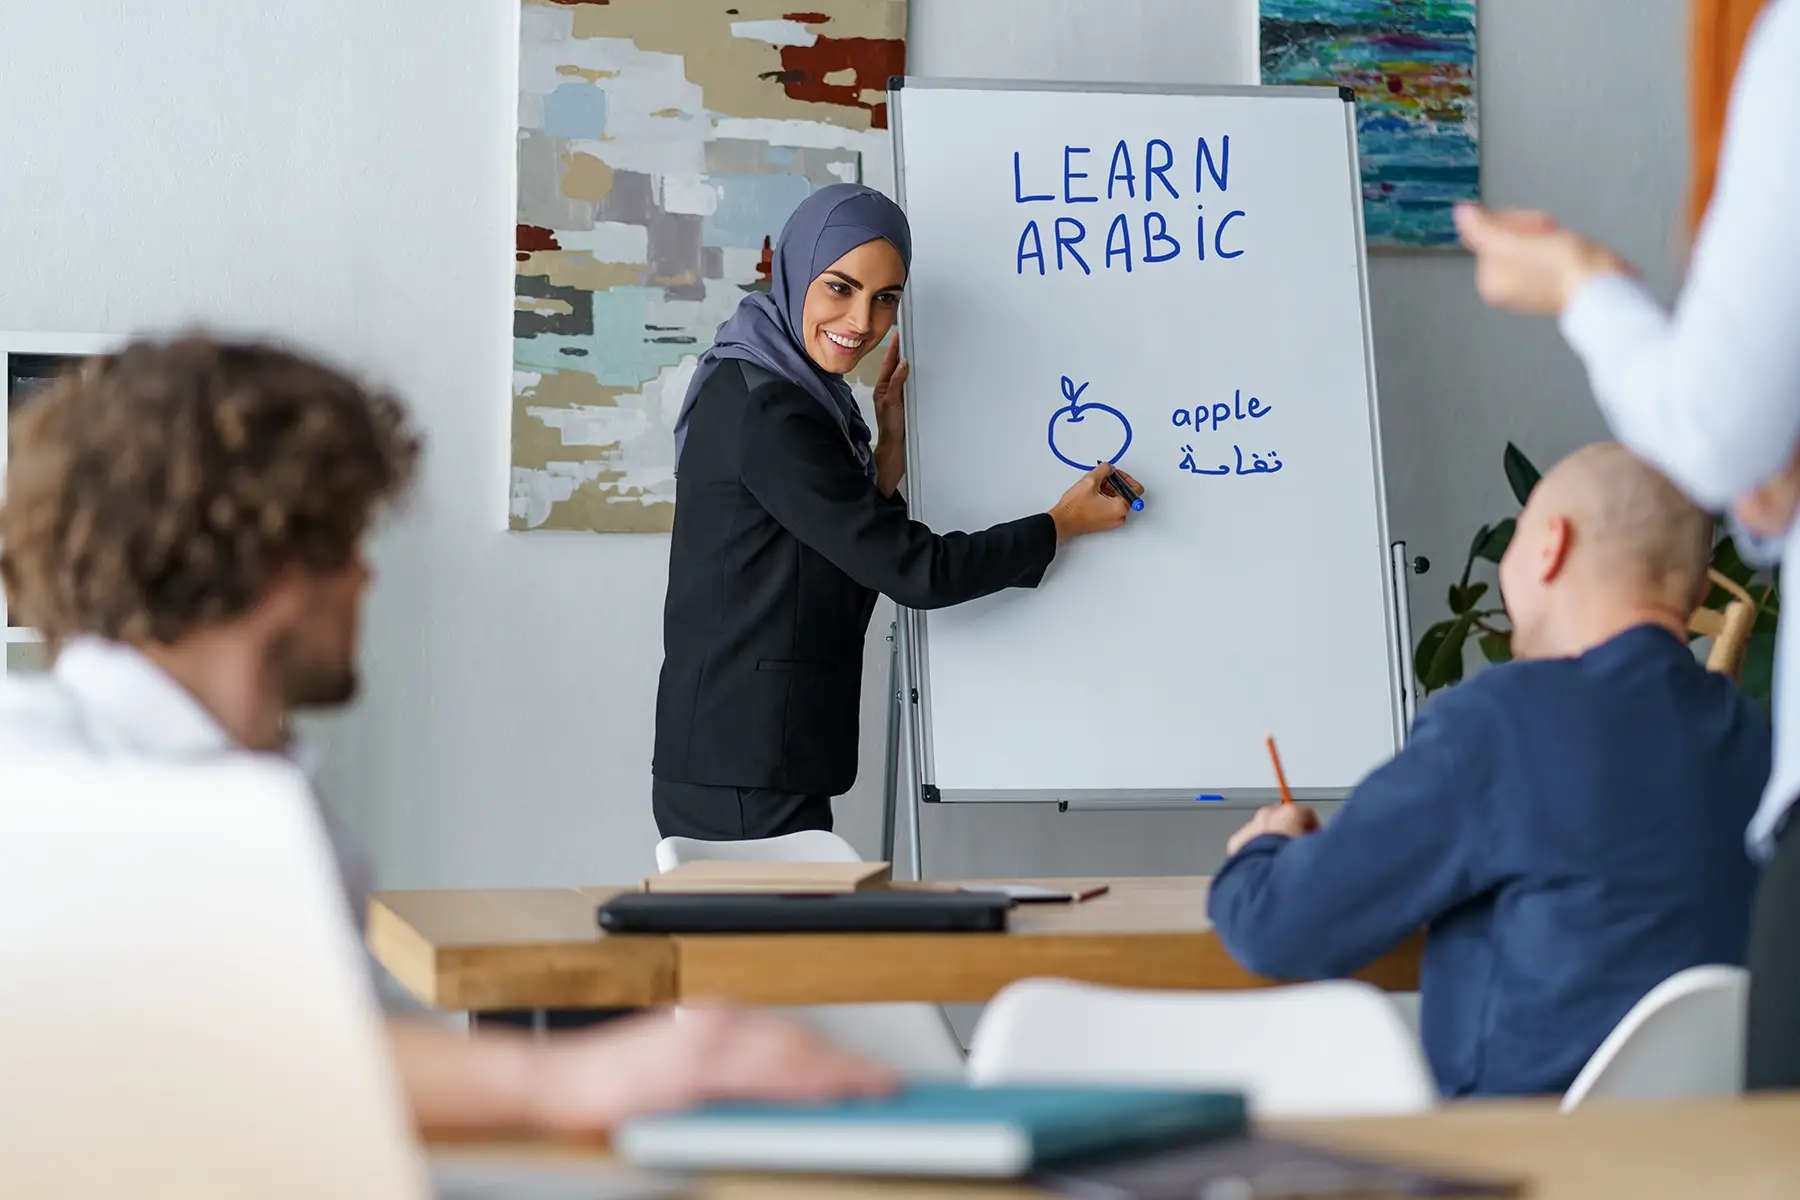 Arabic lesson: teacher has drawn an apple and written 'apple' in English and Arabic on the board